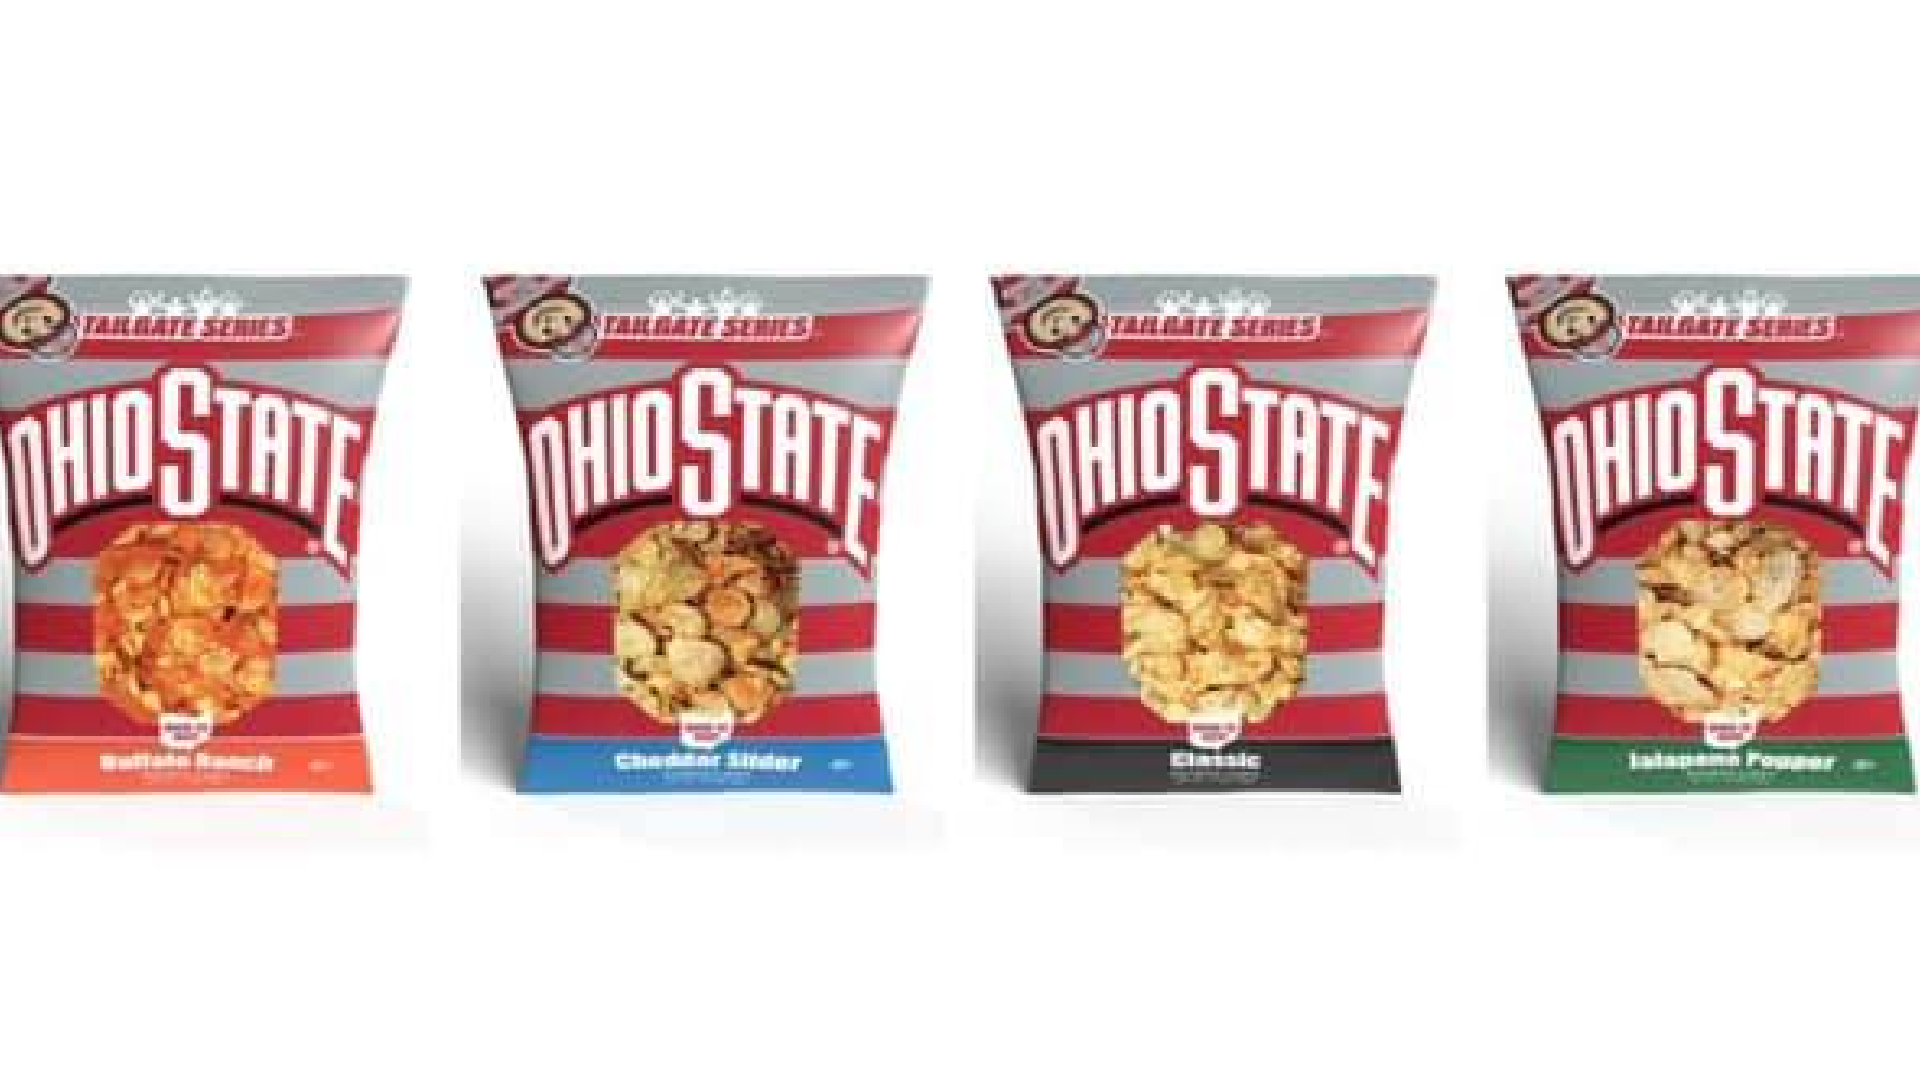 The Tailgate Series will consist of four popular tailgating flavors, made right here in Ohio.